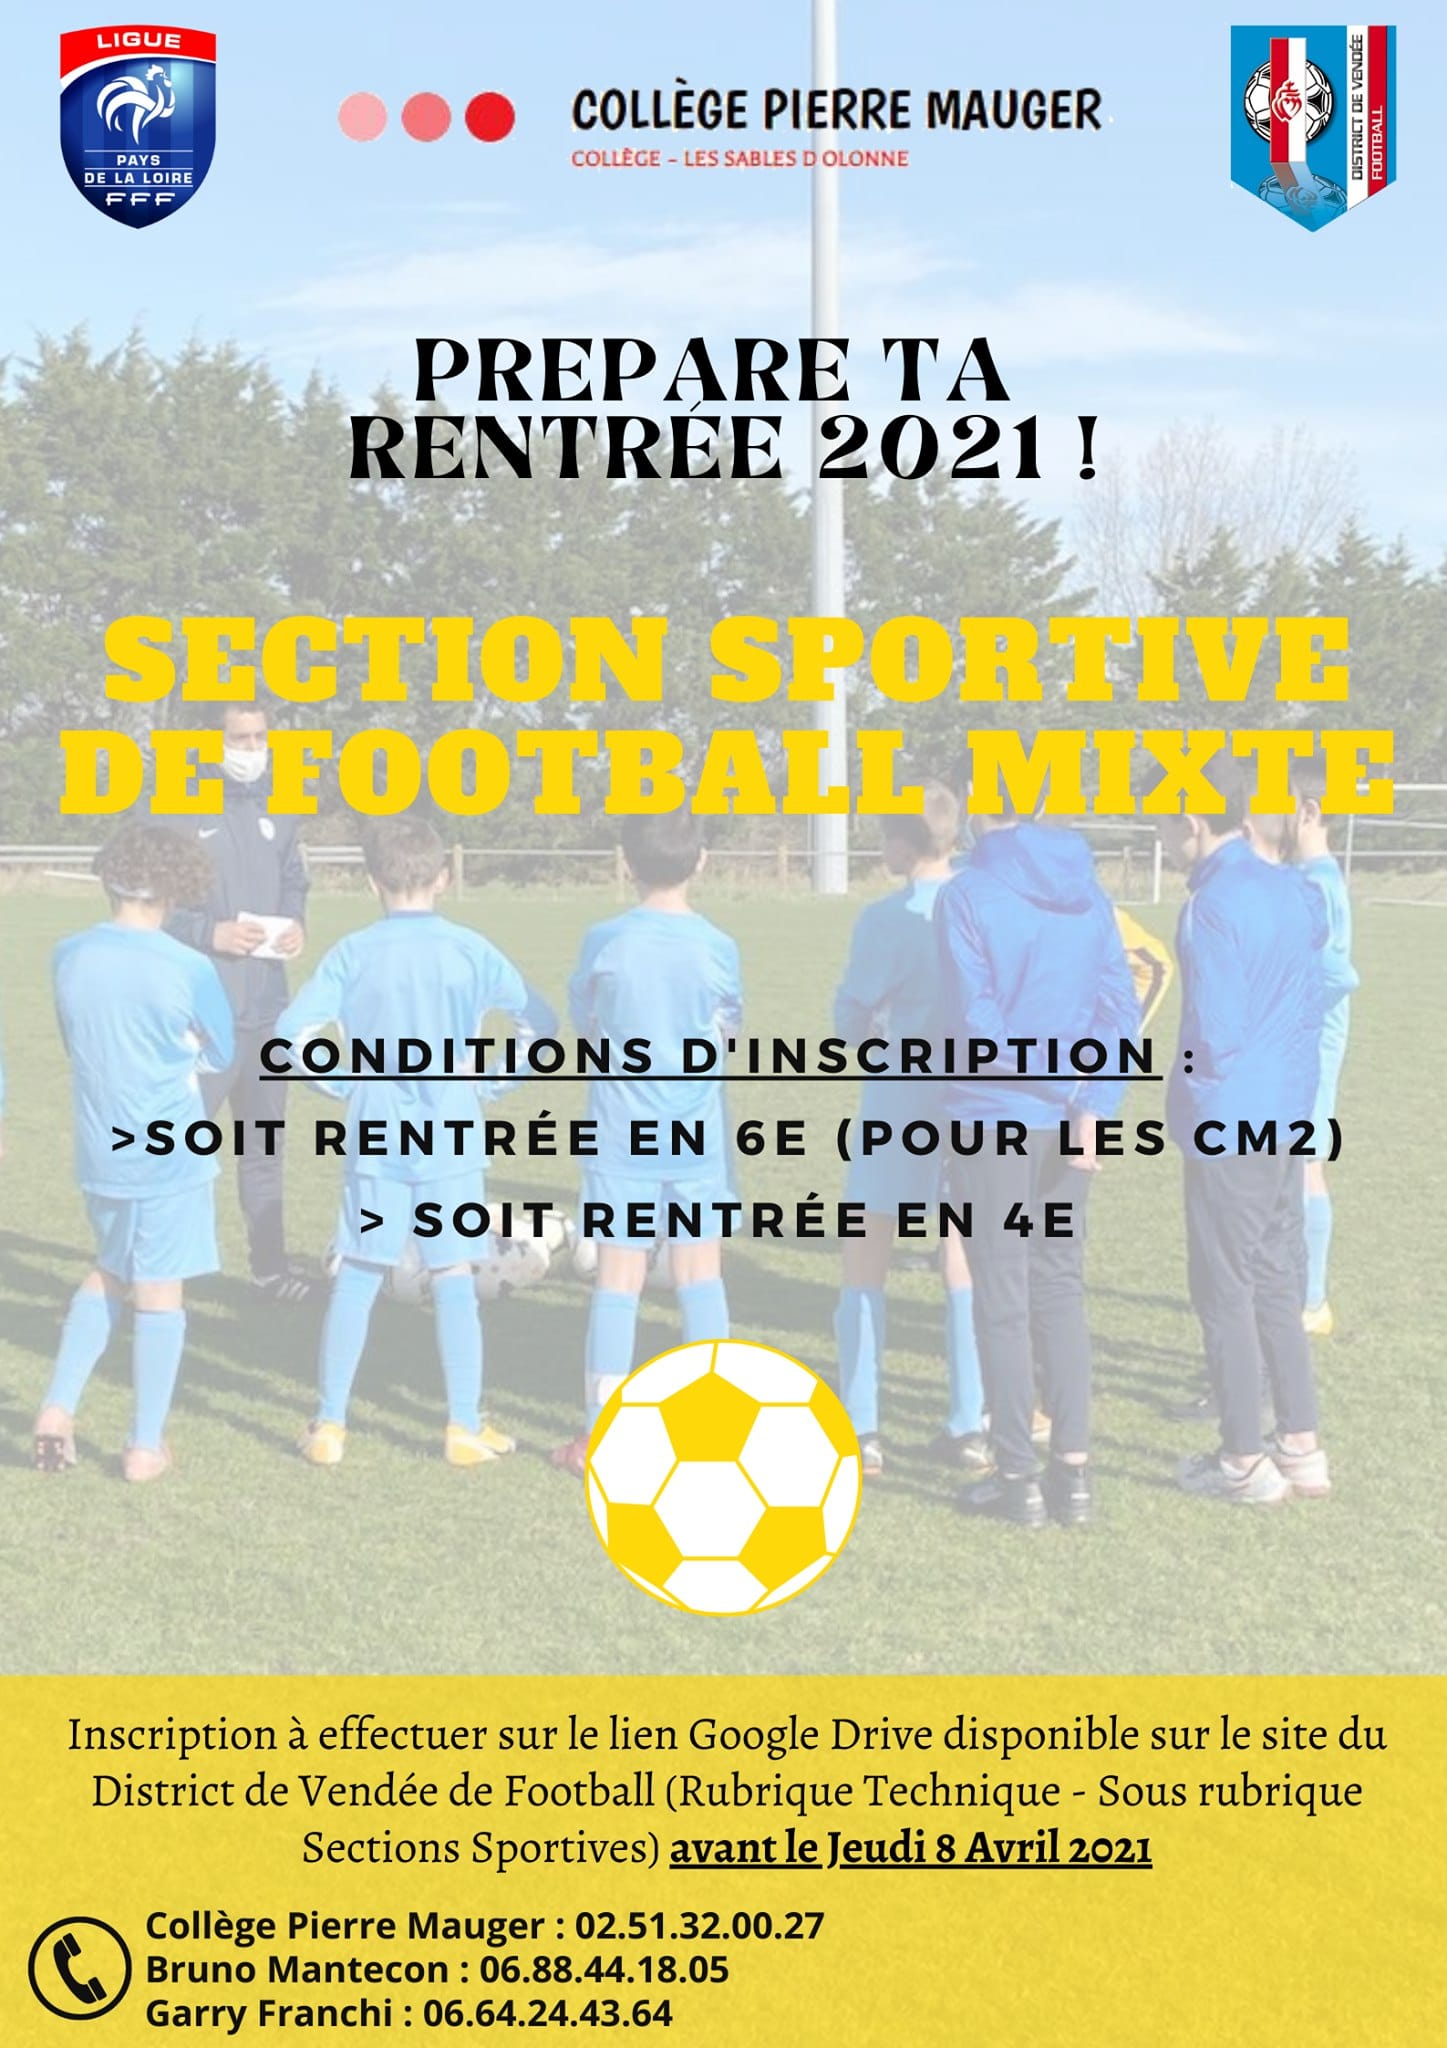 Section sportive